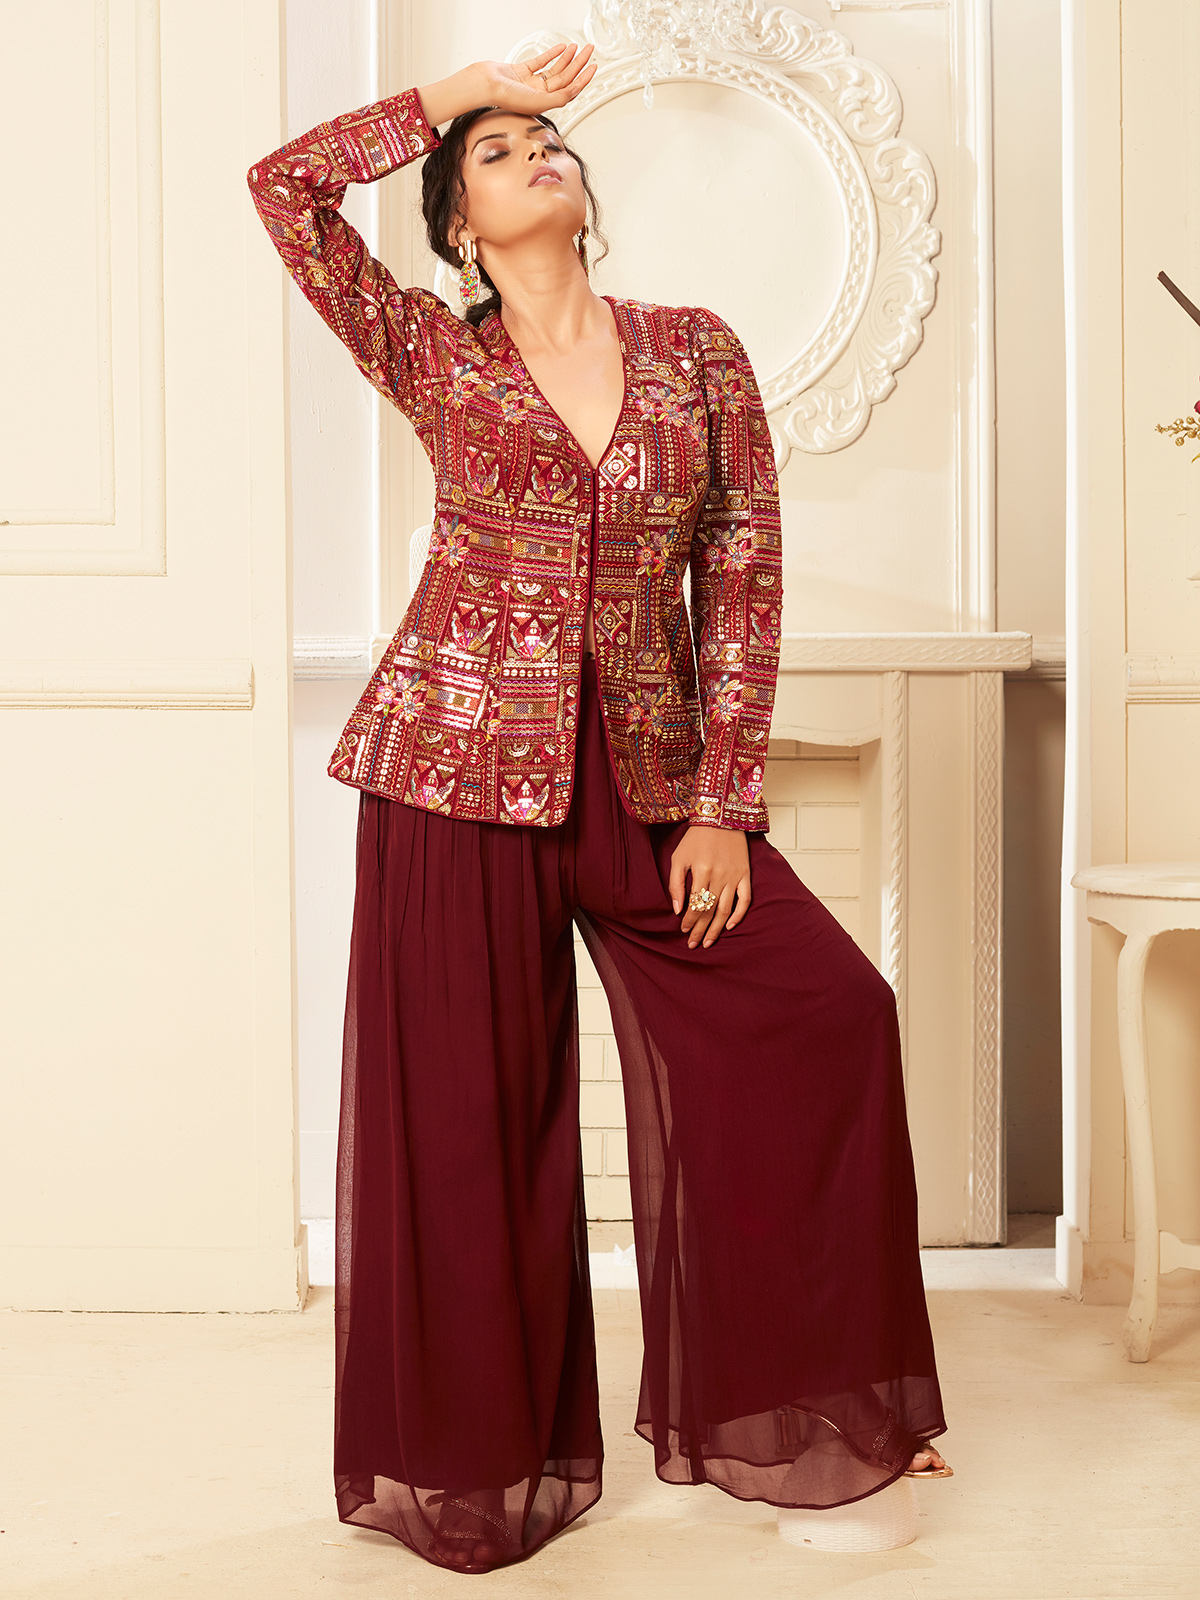 Shop For Women's Ethnic Jackets & Waistcoats Online At Best Prices | LBB